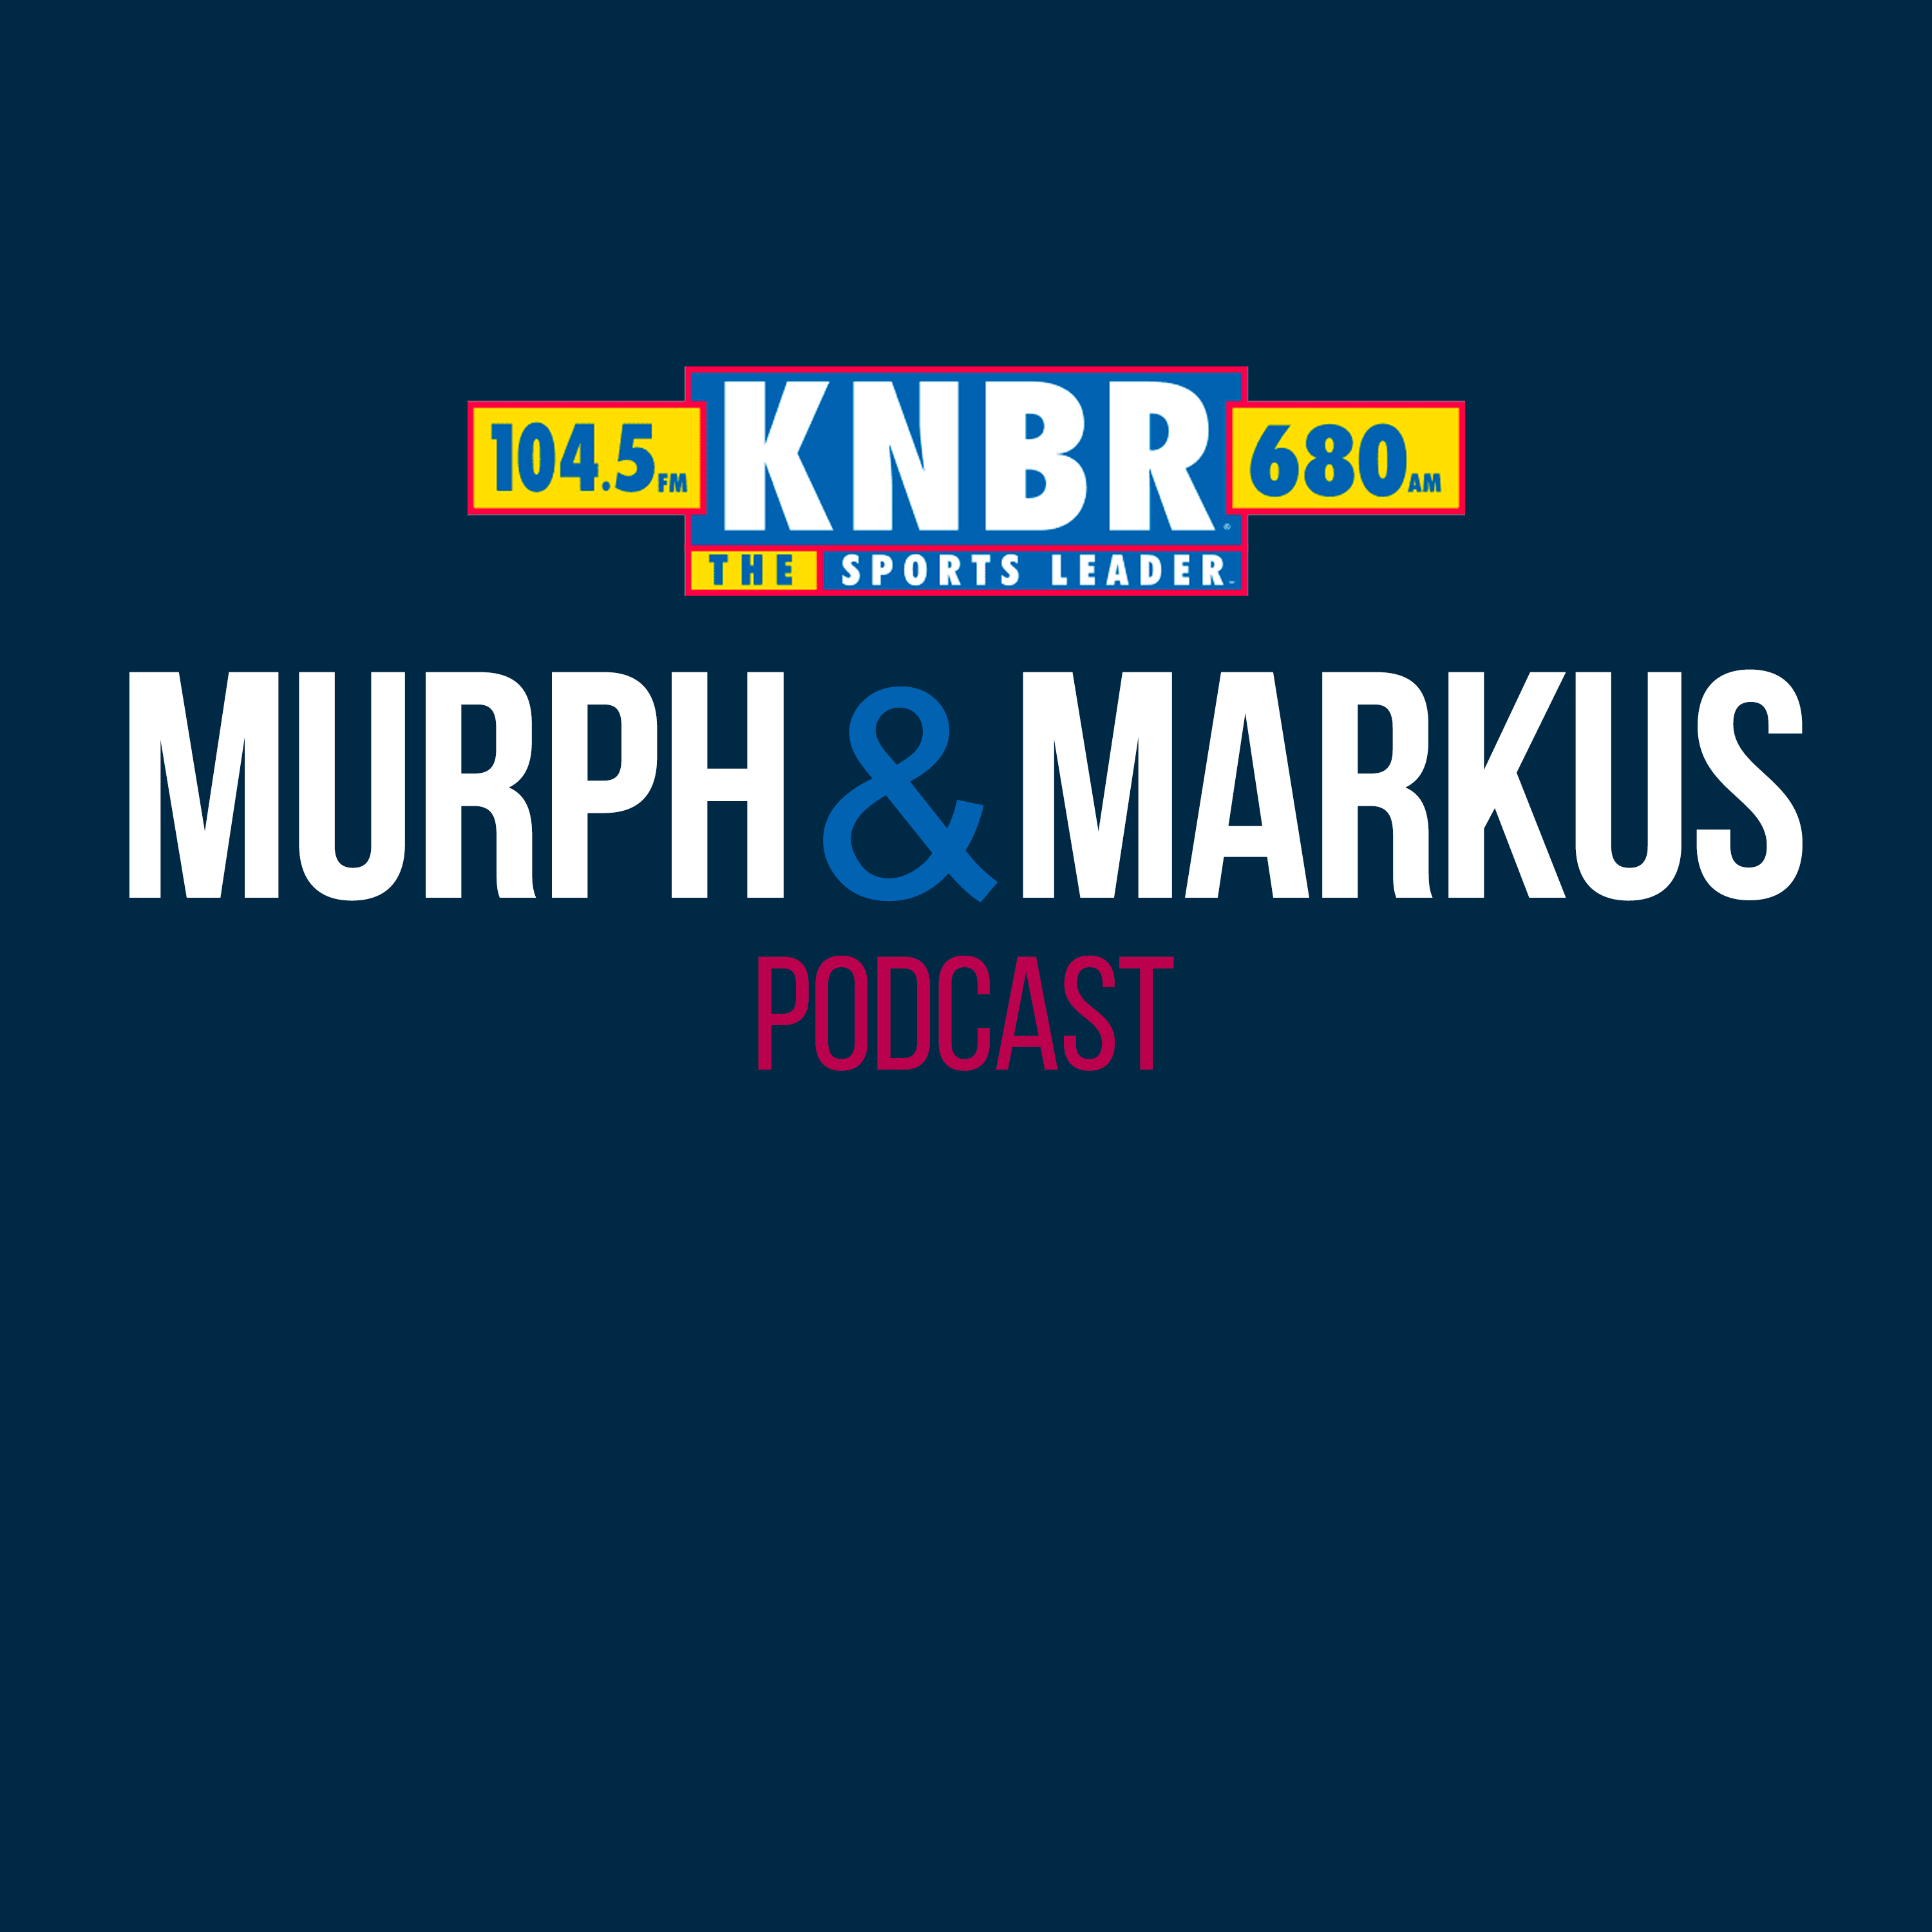 7-15 Hour 1: Murph & Markus react to Blake Snell's dominant outing on Sunday, share their thoughts on the Giants 1st round draft pick James Tibbs III, and recap the weekend in sports with Humms & Bums